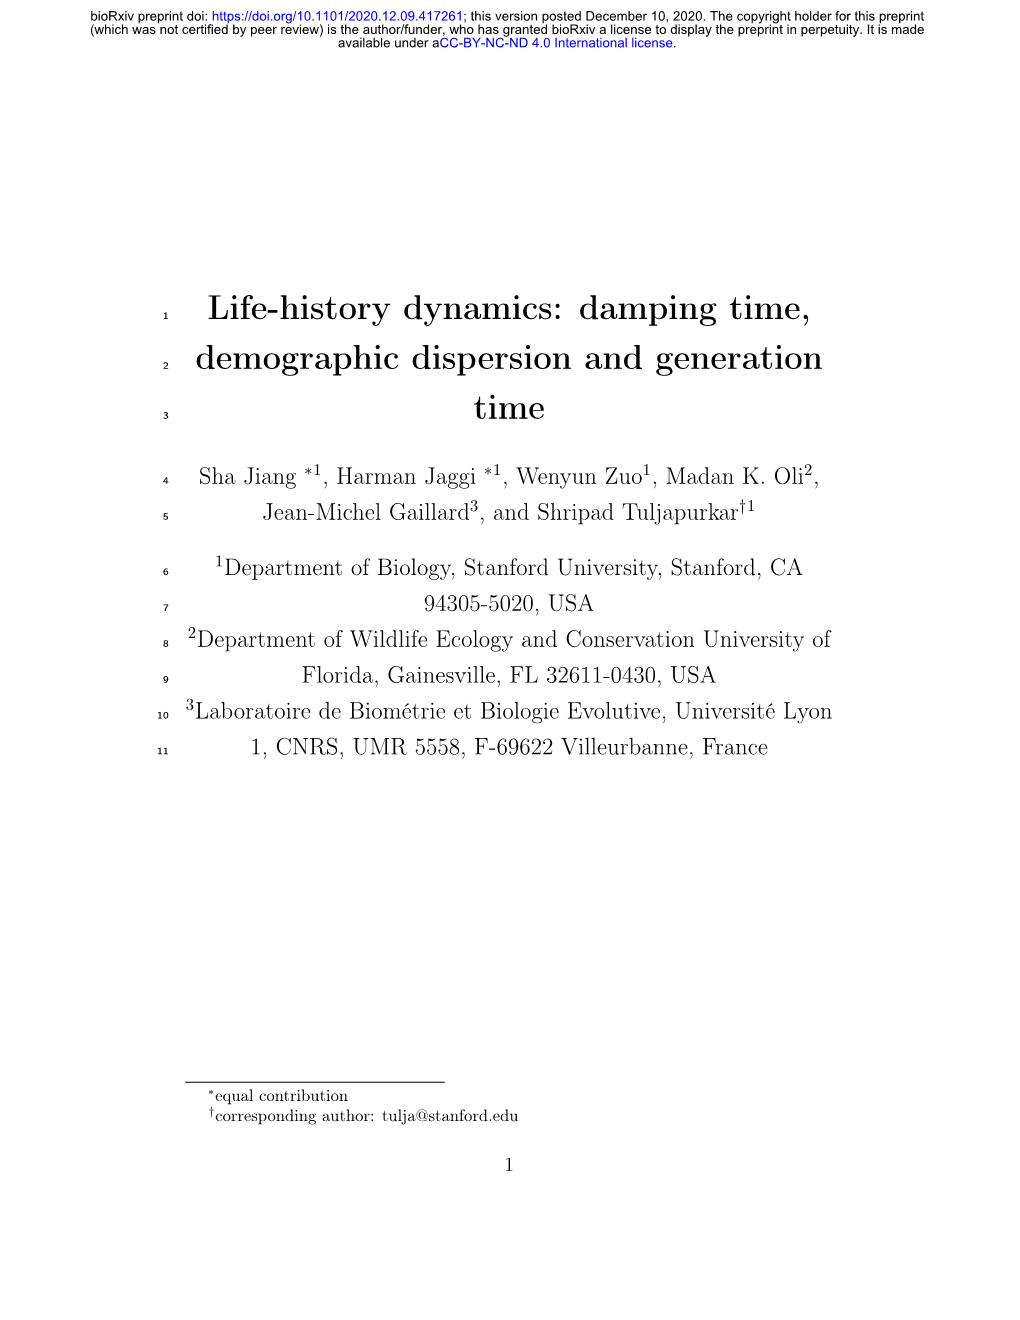 Damping Time, Demographic Dispersion and Generation Time